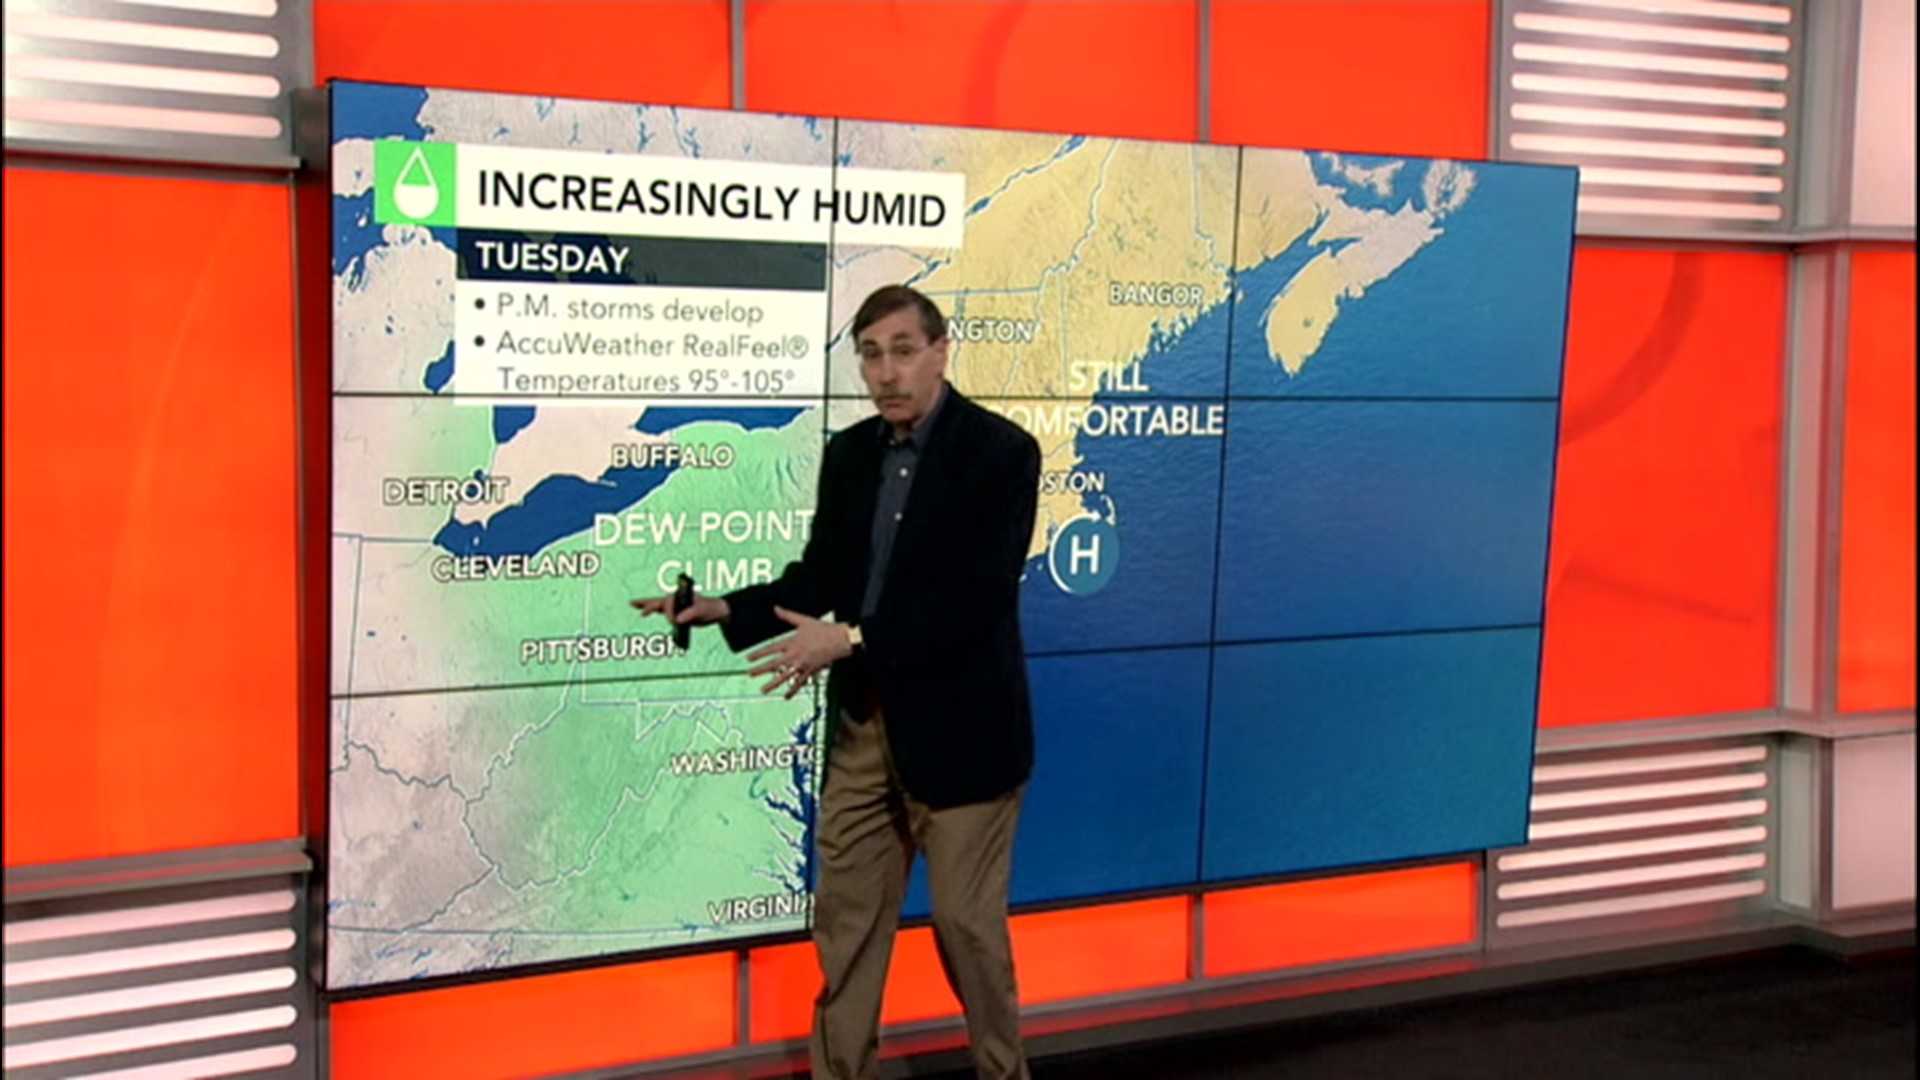 Heating is likely then downpours late Wednesday and Thursday. Evan Myers has details